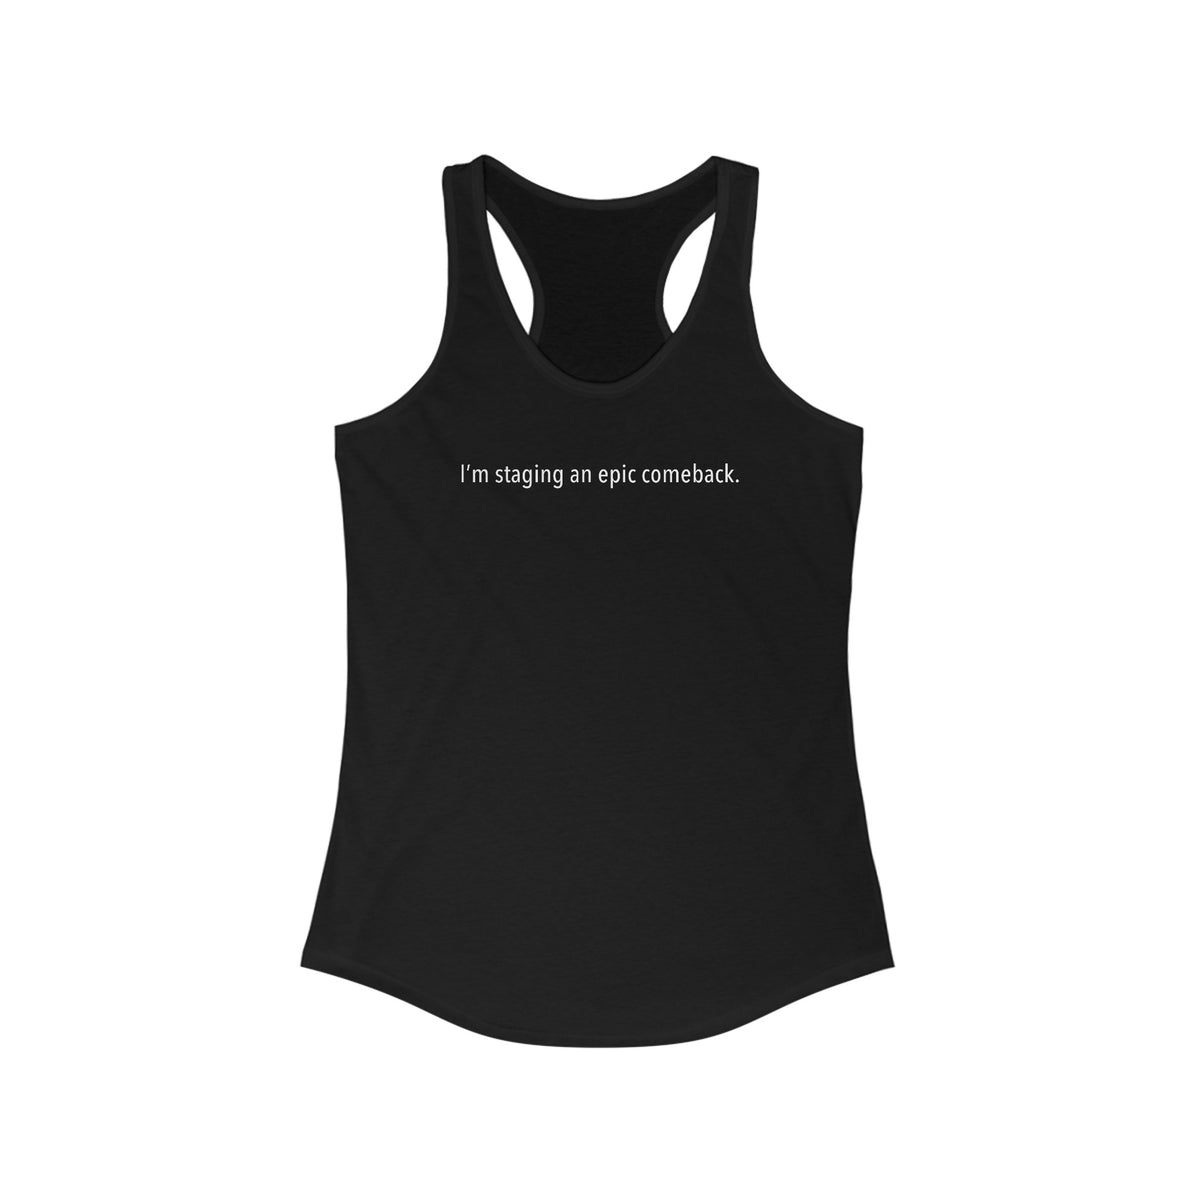 I'm Staging An Epic Comeback. - Women’s Racerback Tank